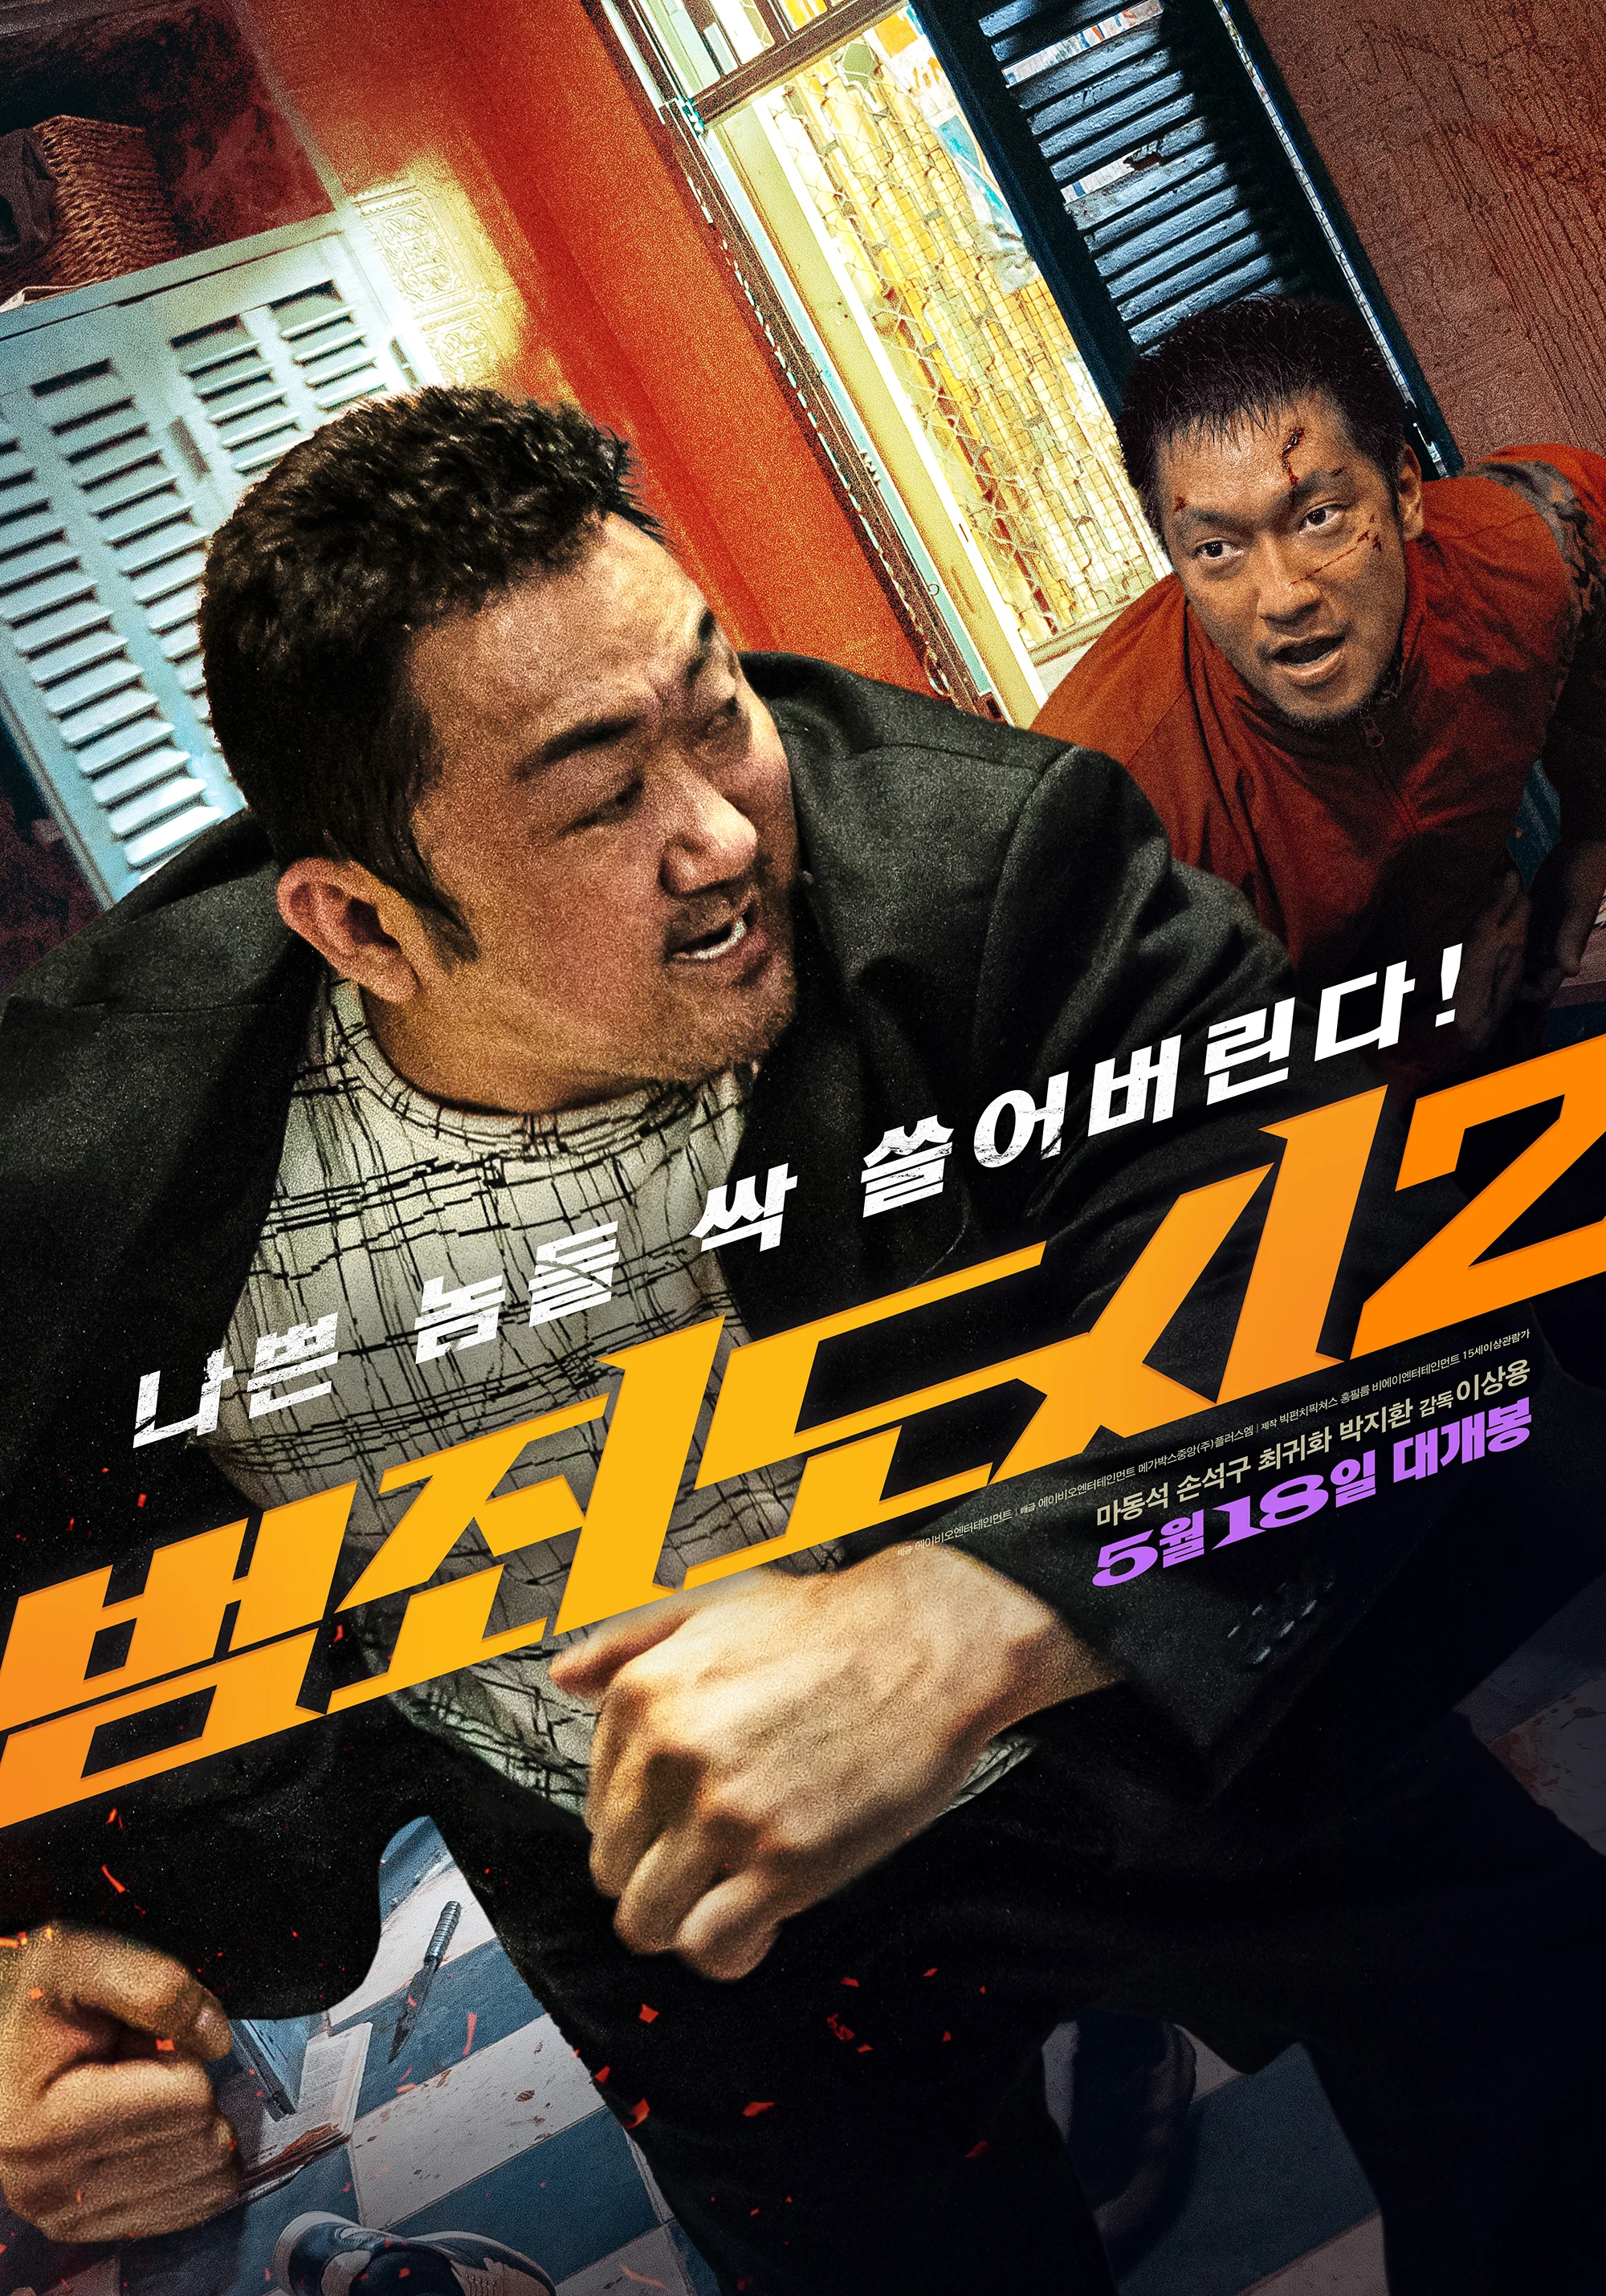 New trailer and poster for "The Roundup" starring Tong-Seok Ma, it will be released in Korea on May 18